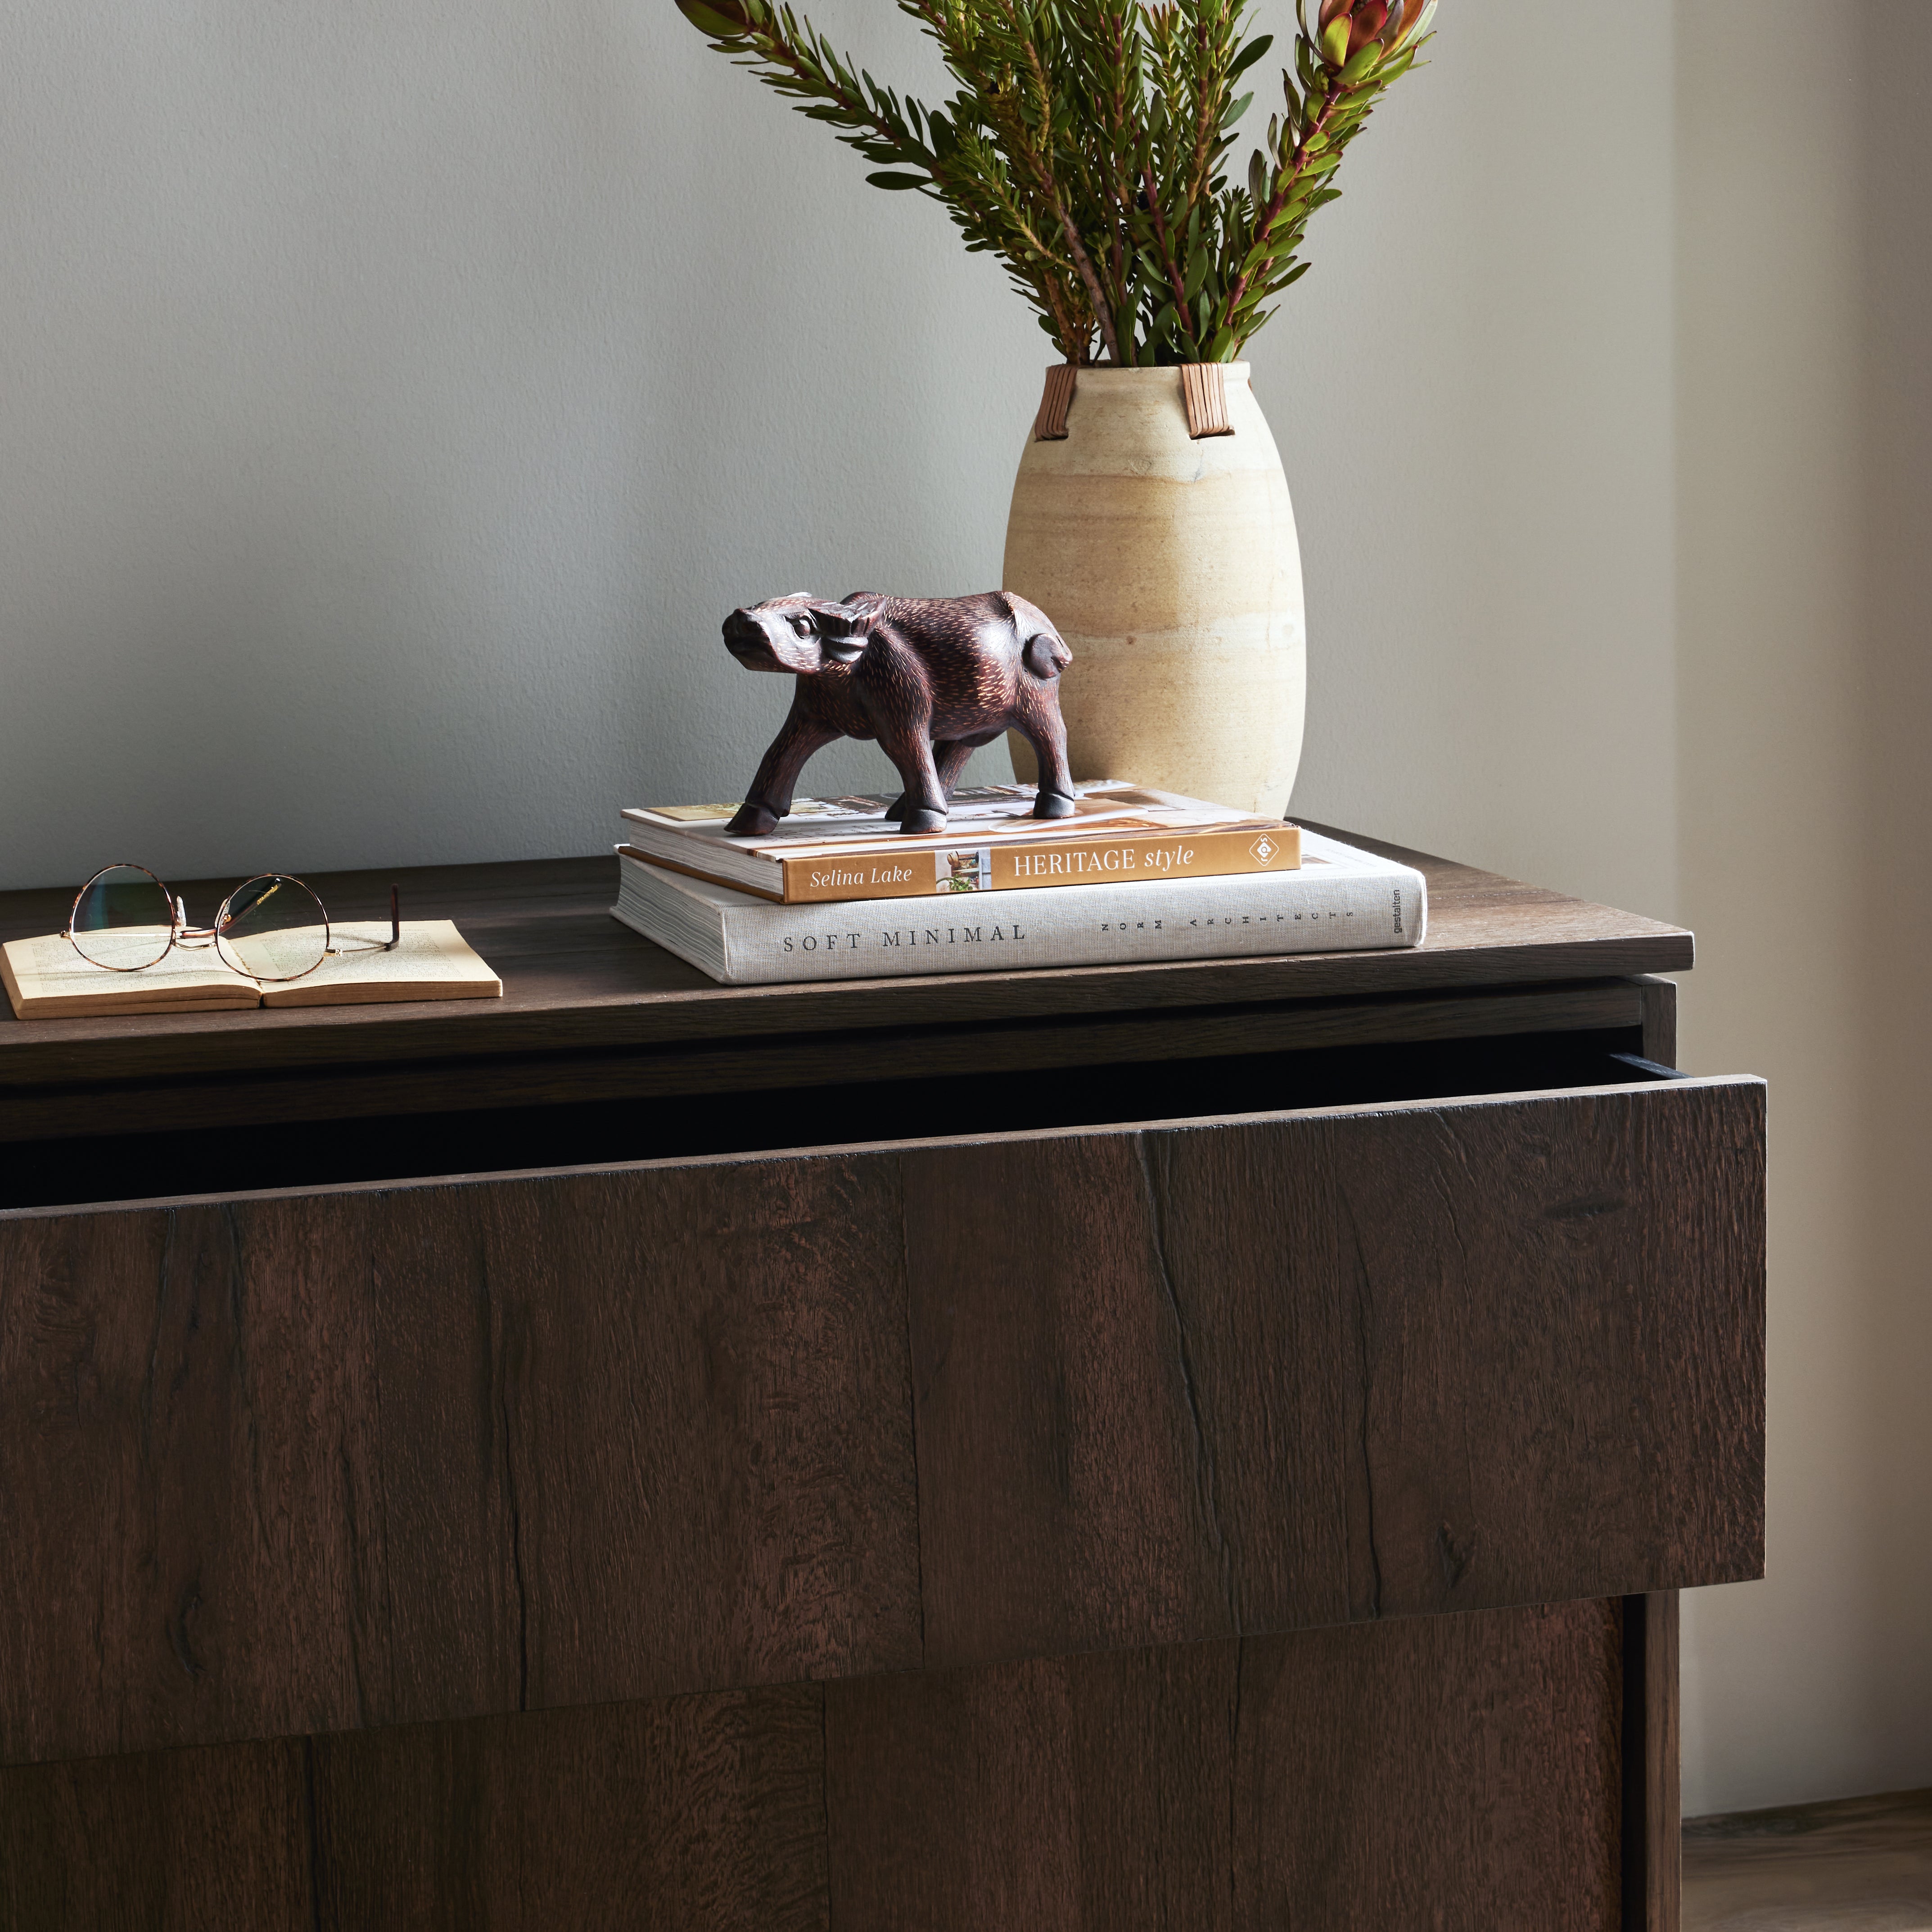 Structured lines define the sleek, modern shape of this large nightstand. Dark oak finishing showcases heavy graining and detail. Amethyst Home provides interior design, new construction, custom furniture, and area rugs in the Nashville metro area.